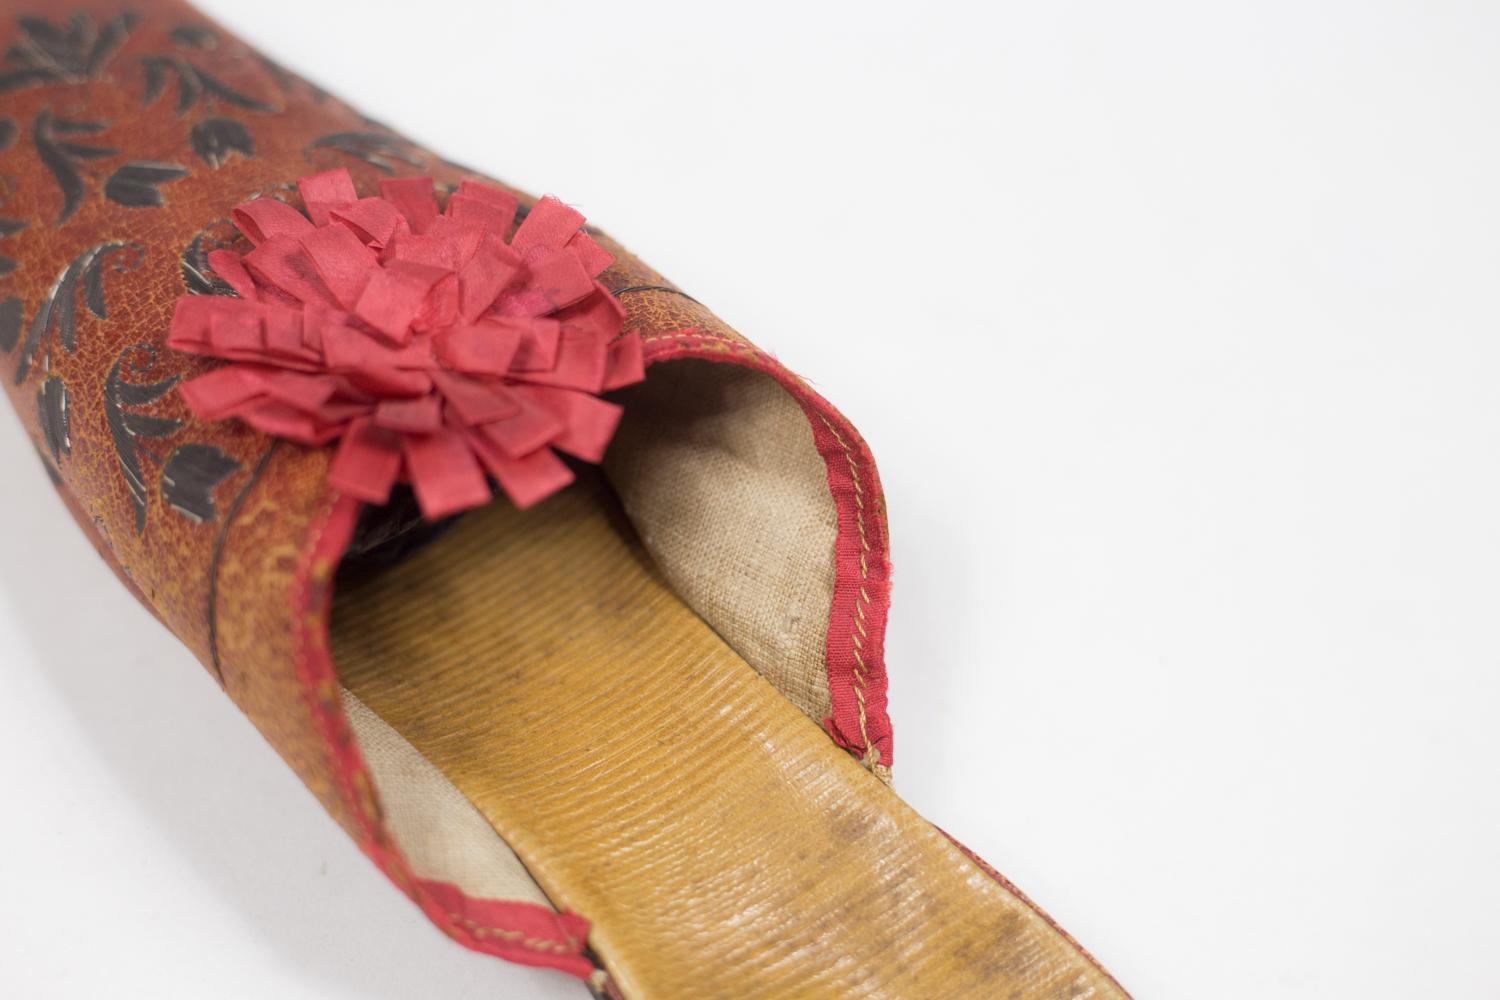 Pair Of Leather Slippers Embroidered With Tulips - France Early 19c For Sale 3